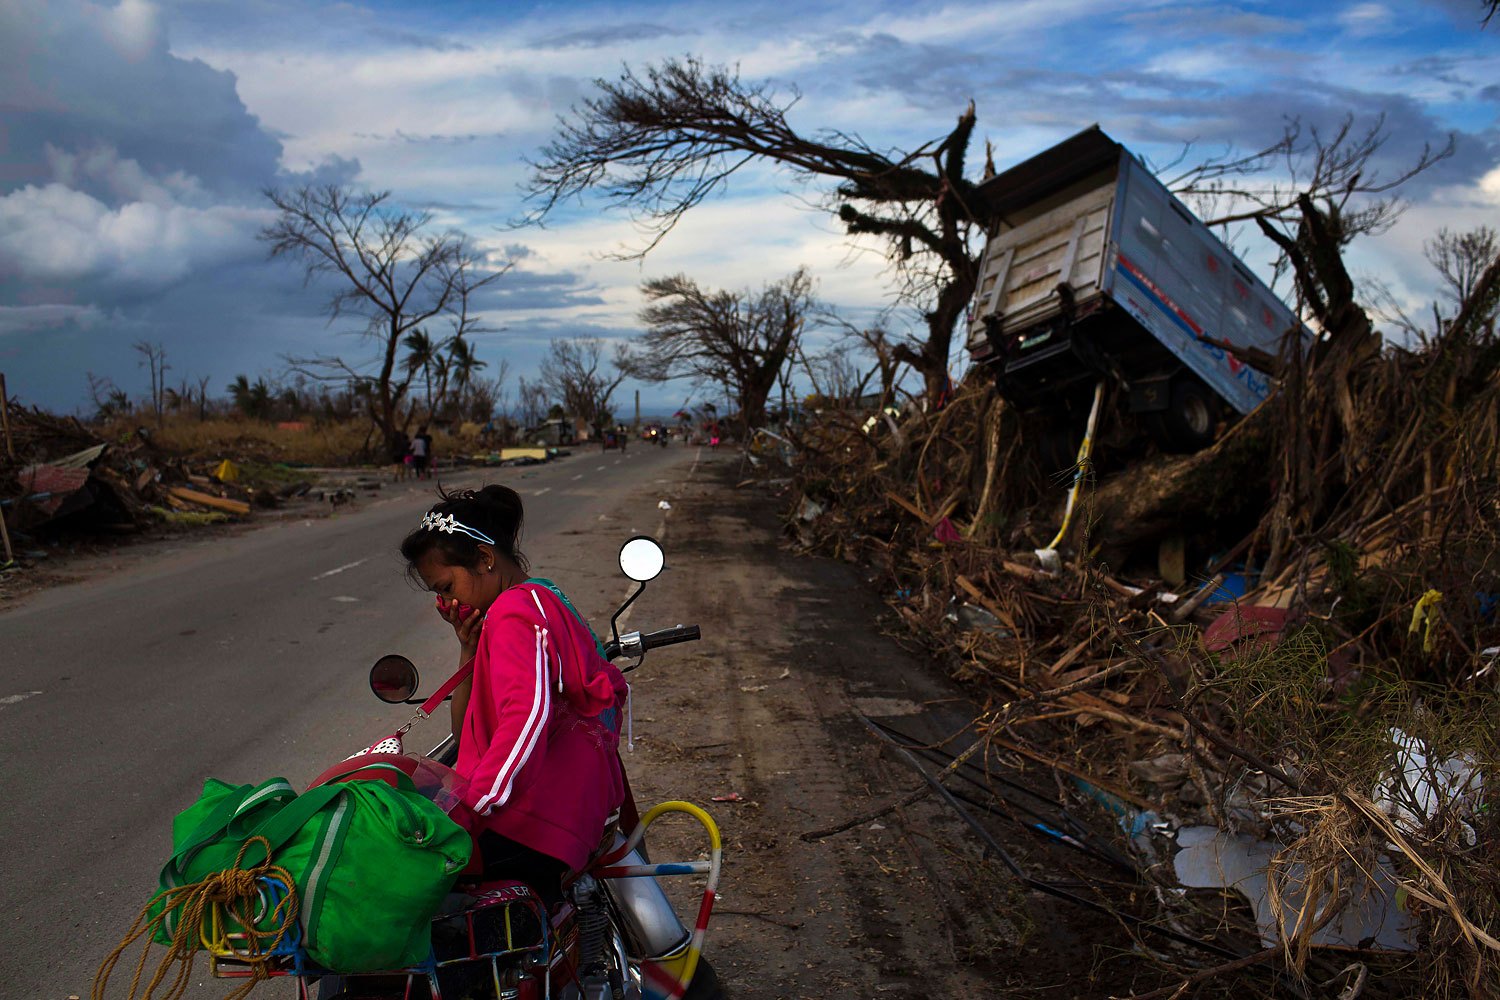 A woman rests on a roadside with her family's belongings near the Typhoon Haiyan ravaged town of Tacloban, Philippines on November 13, 2013.